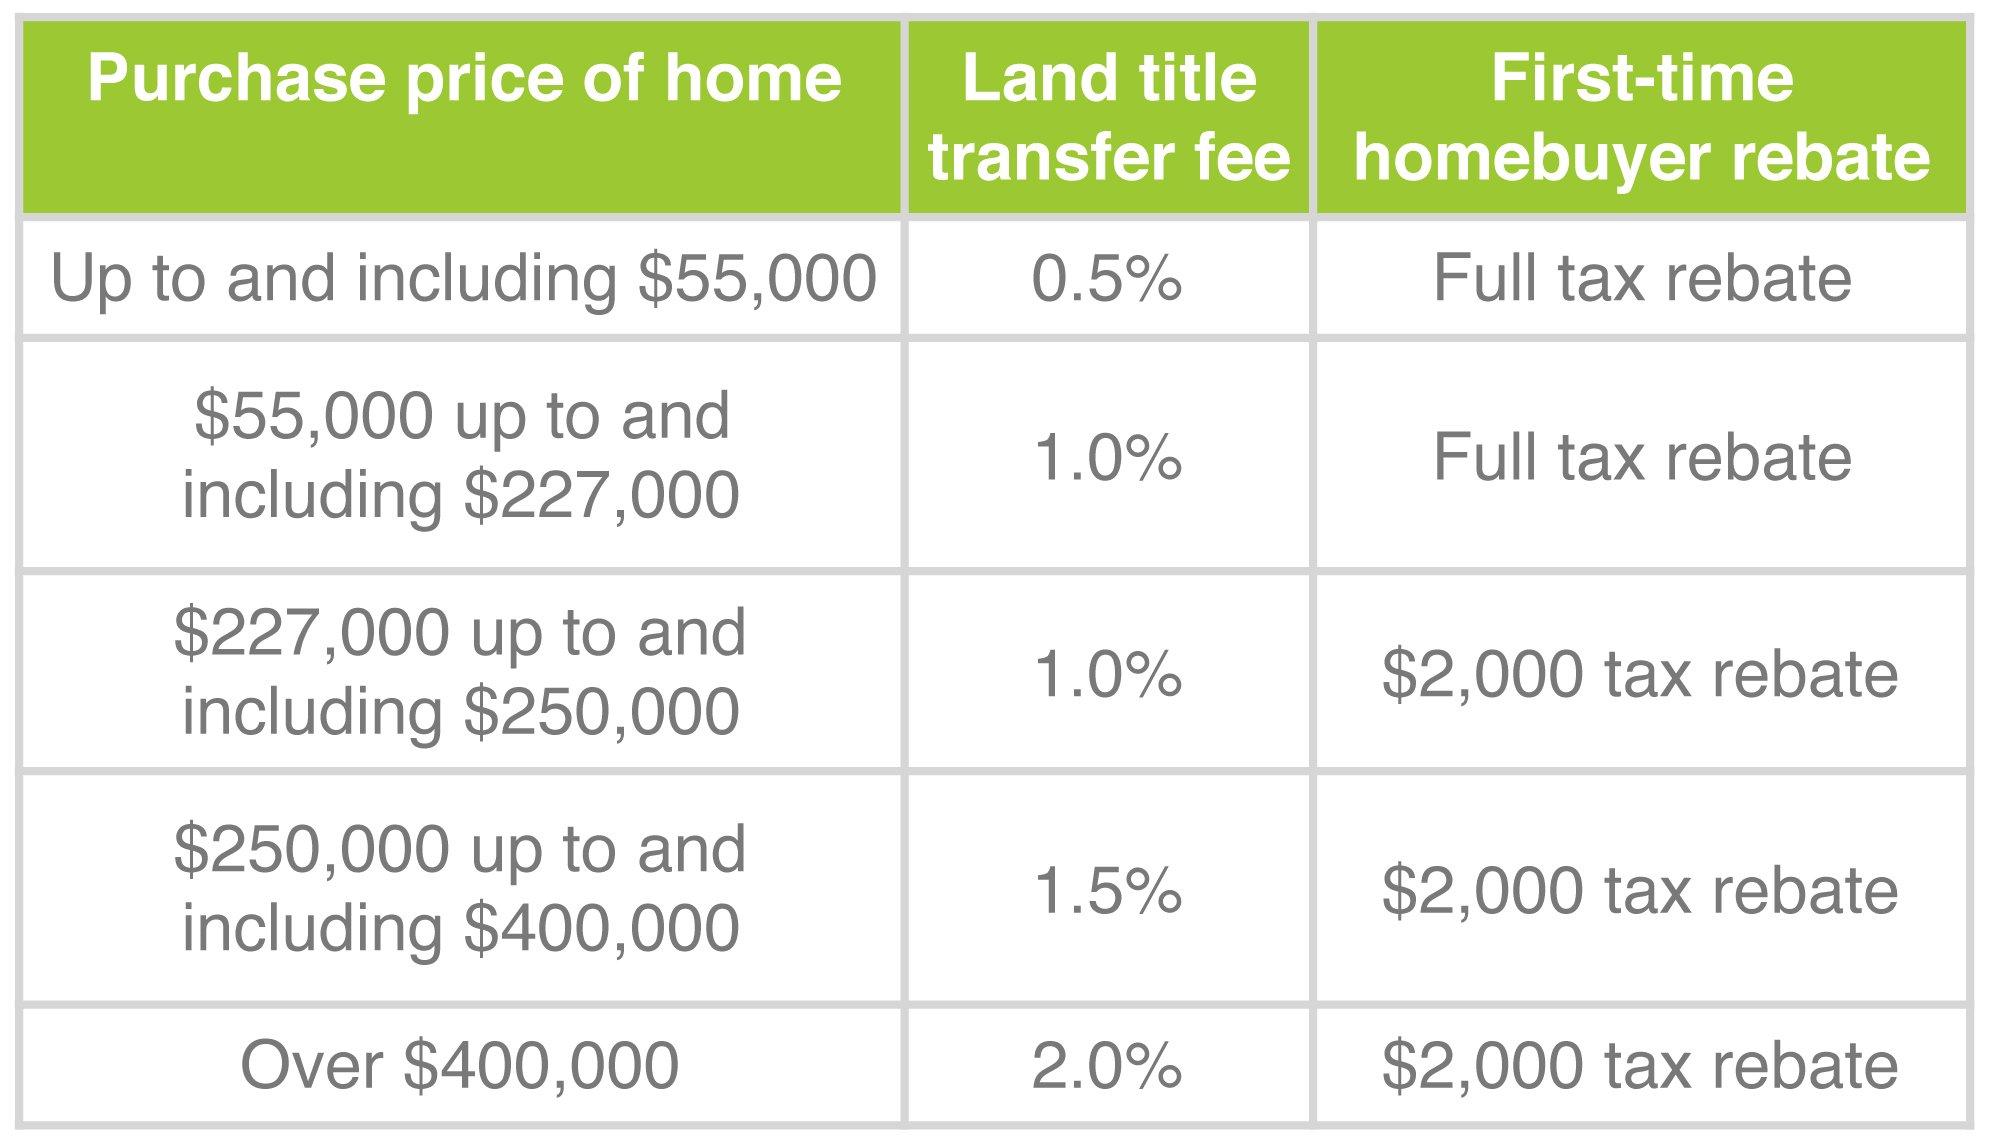 How do you report proceeds from the sale of land on a tax return?